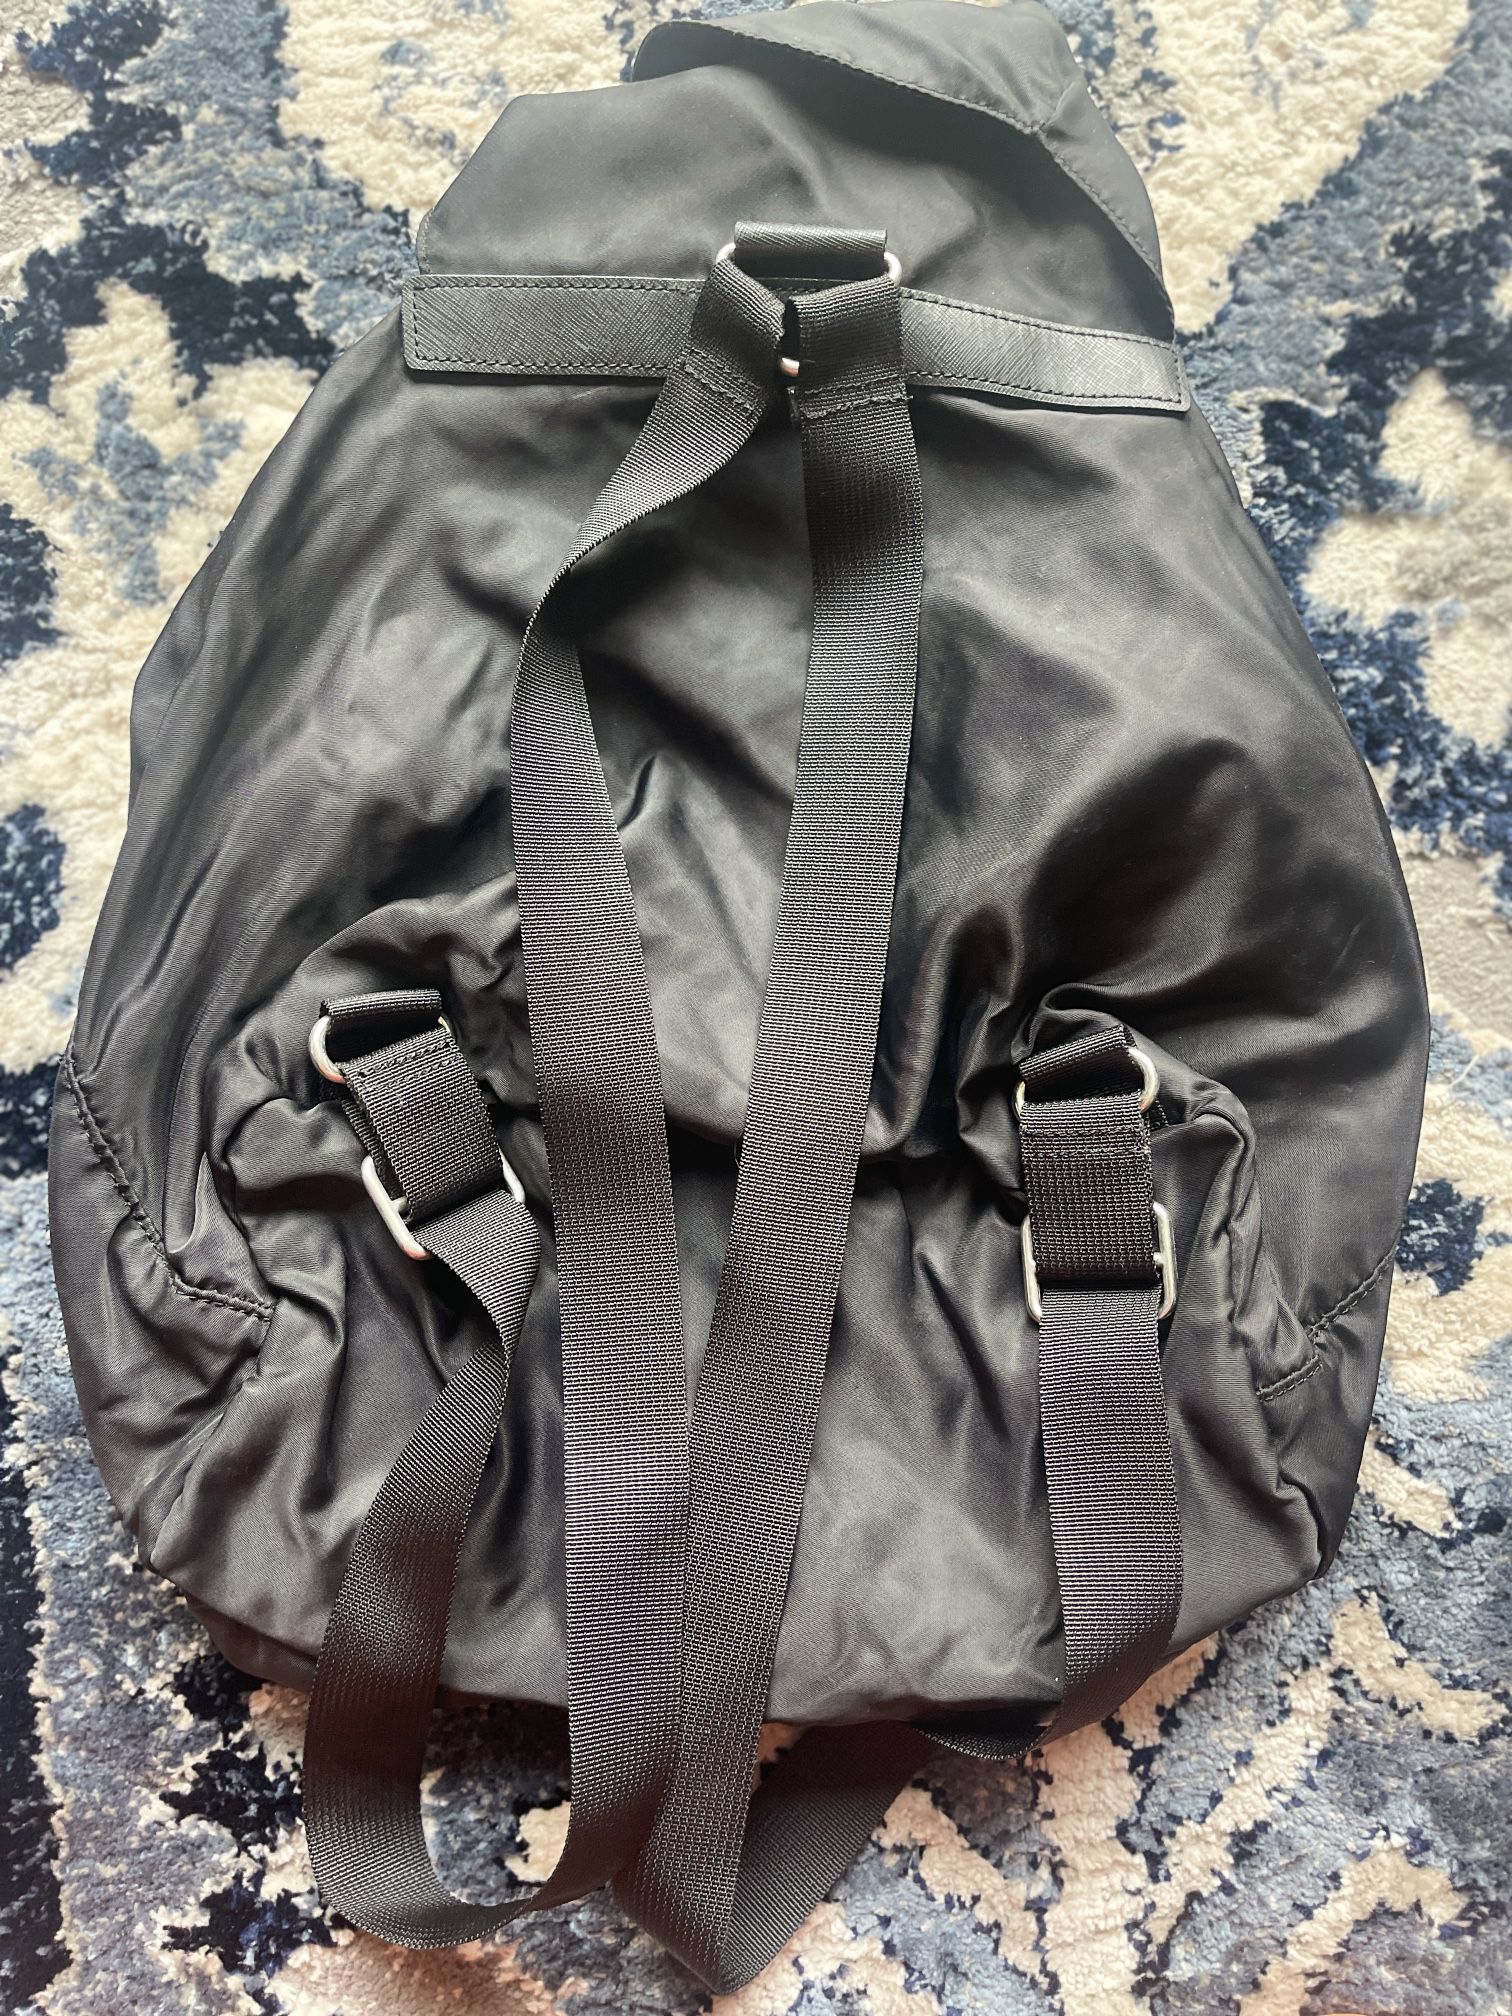 LOUIS VUITTON APOLLO BACKPACK for Sale in City of Industry, CA - OfferUp